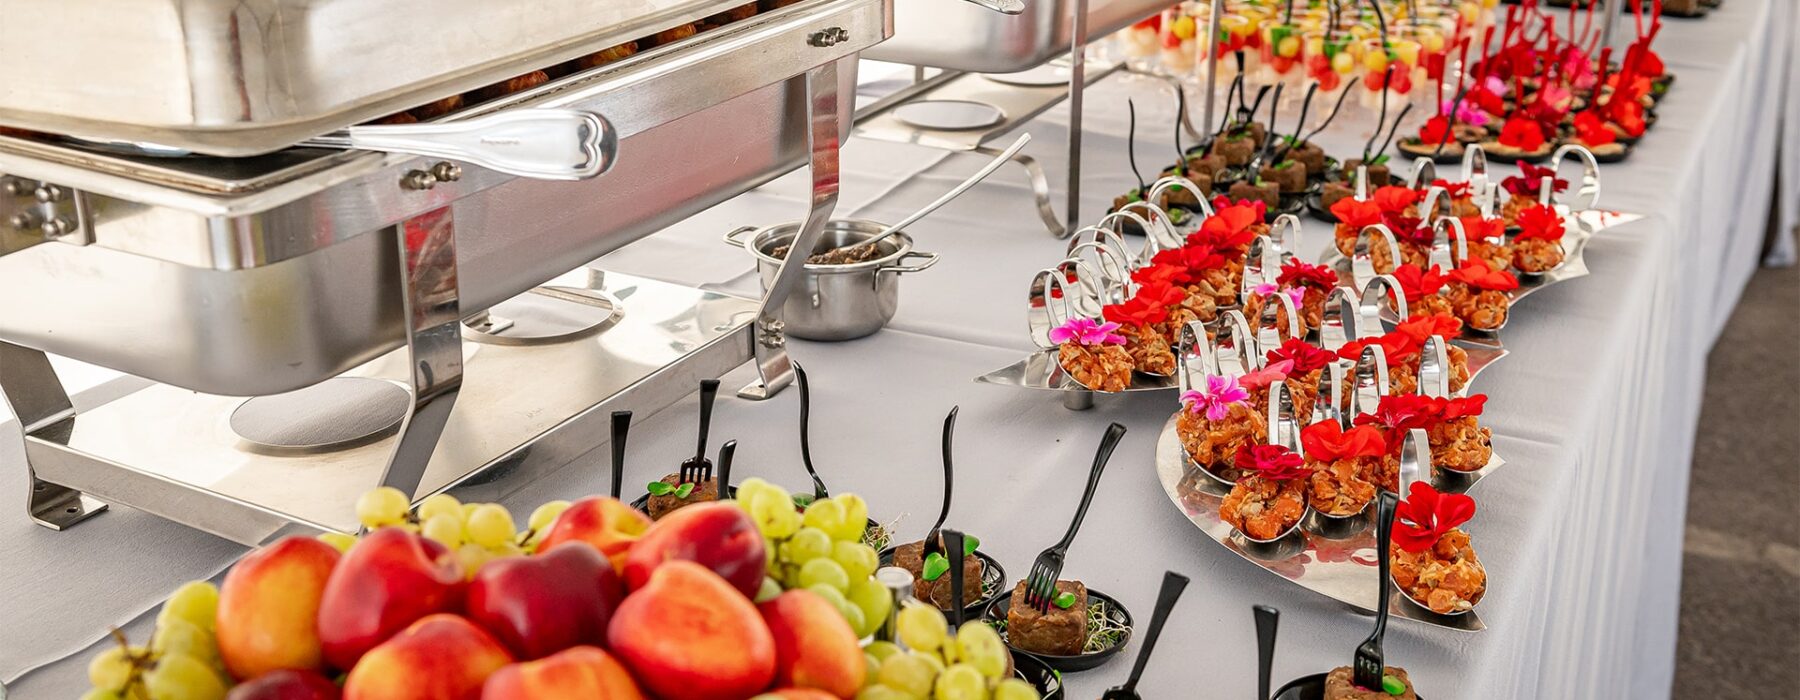 Catering Companies Specialized in Large Private Events